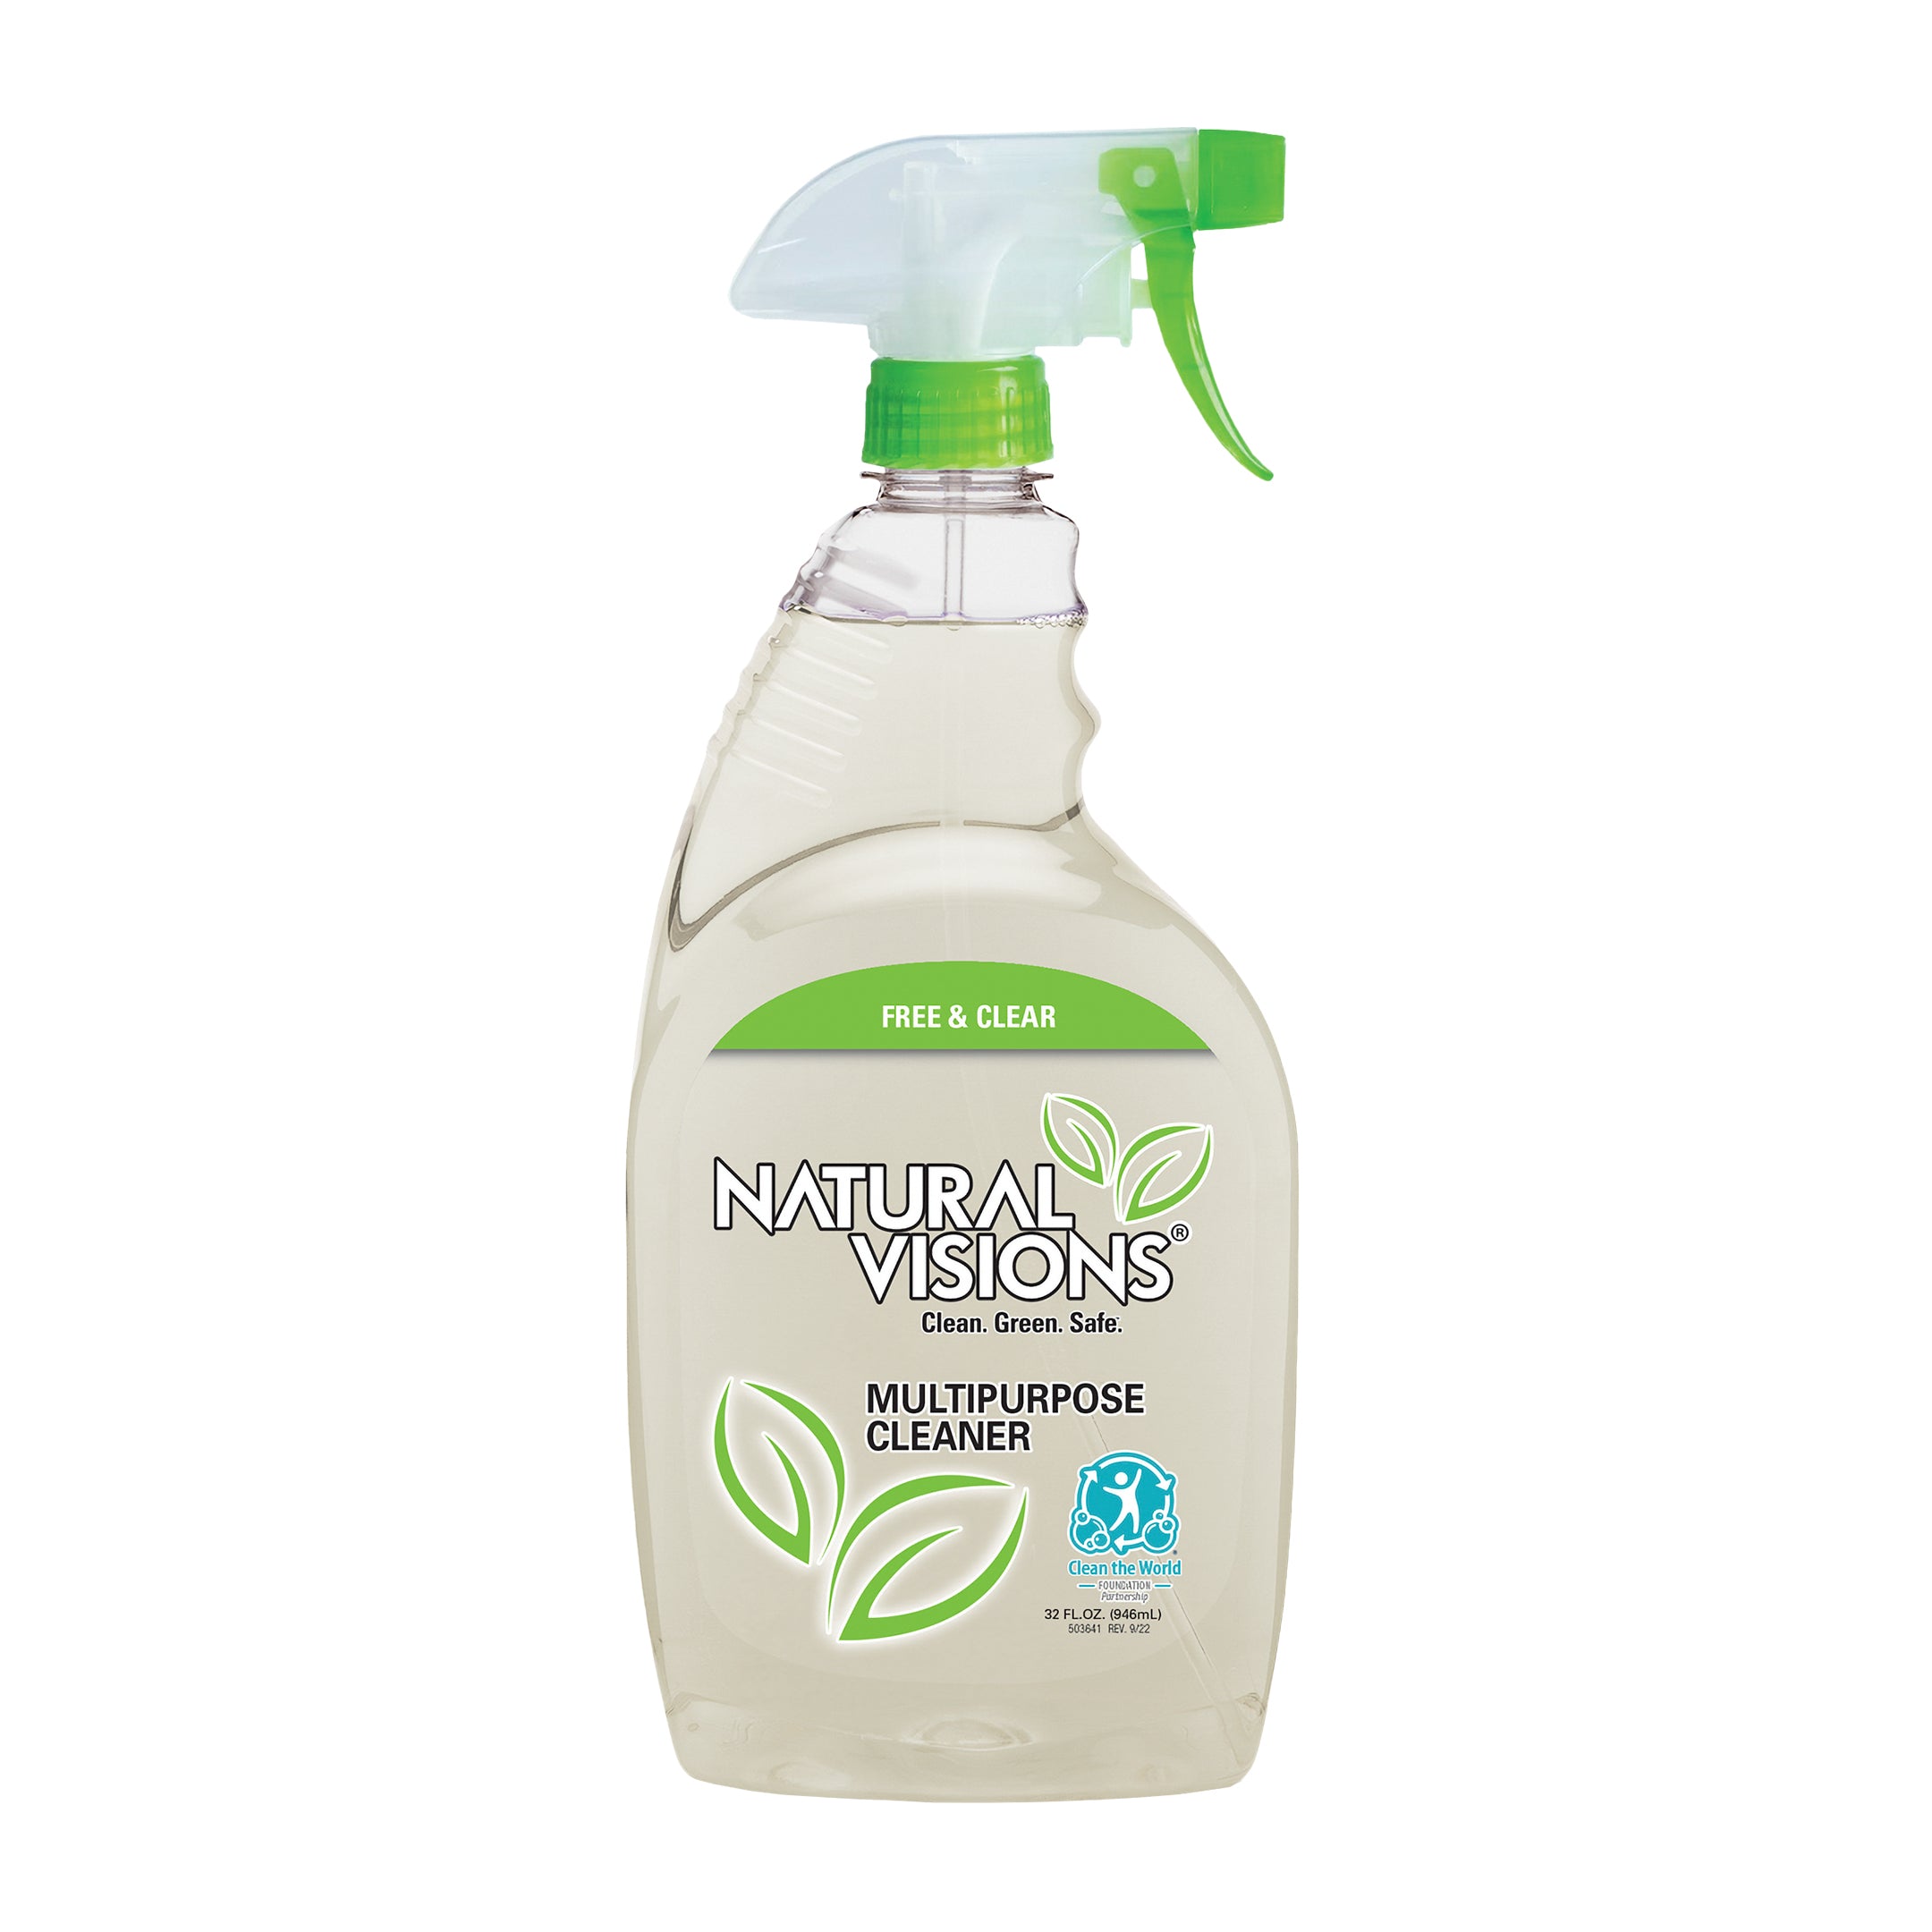 Natural Visions Free & Clear Multipurpose Cleaner - 32oz/6pk